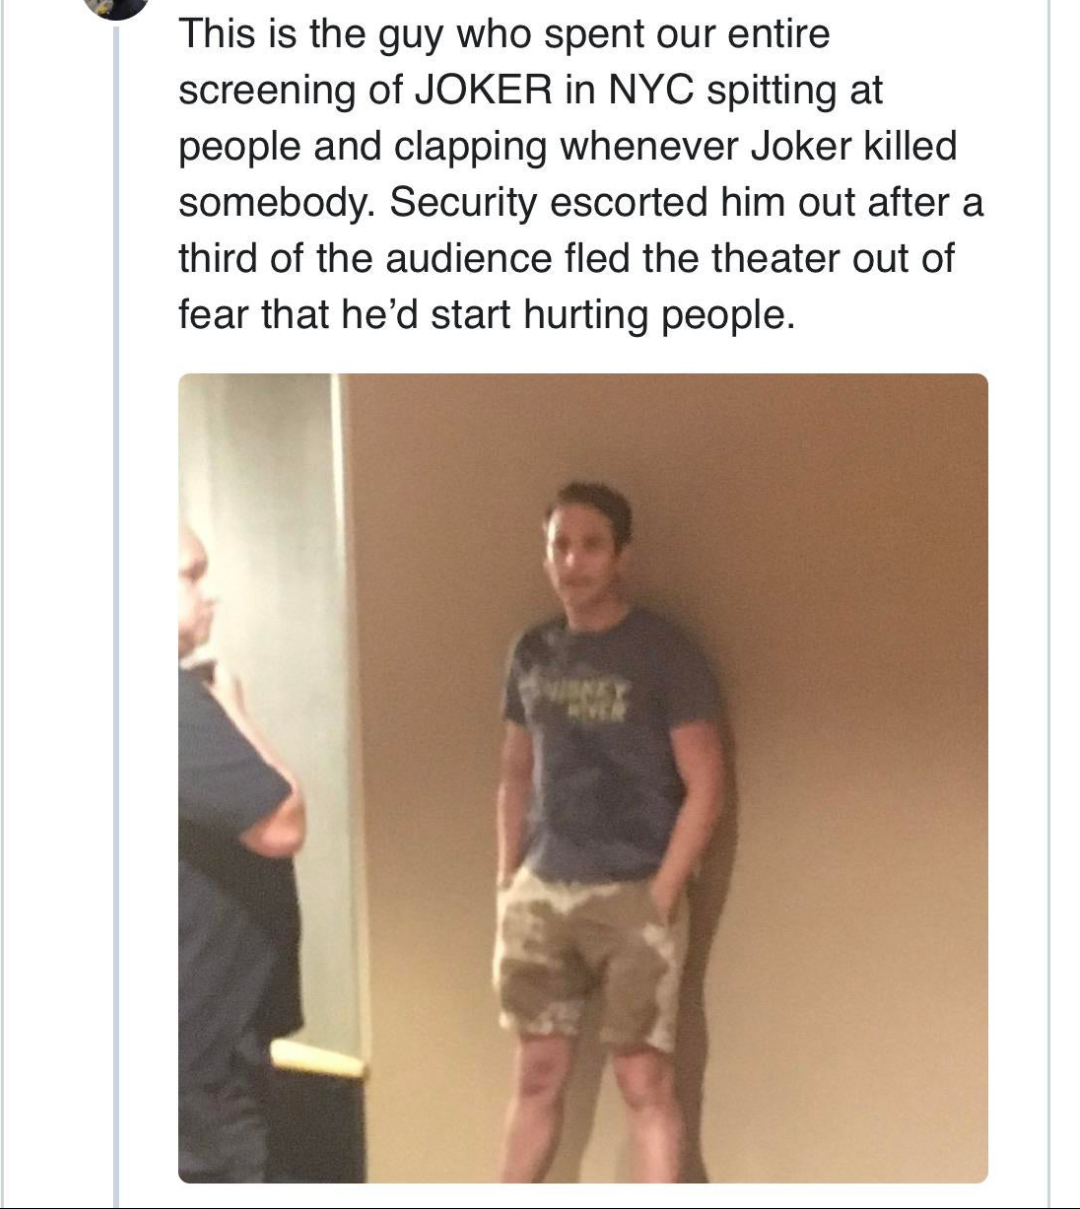 joker stairs short meme - This is the guy who spent our entire screening of Joker in Nyc spitting at people and clapping whenever Joker killed somebody. Security escorted him out after a third of the audience fled the theater out of fear that he'd start h